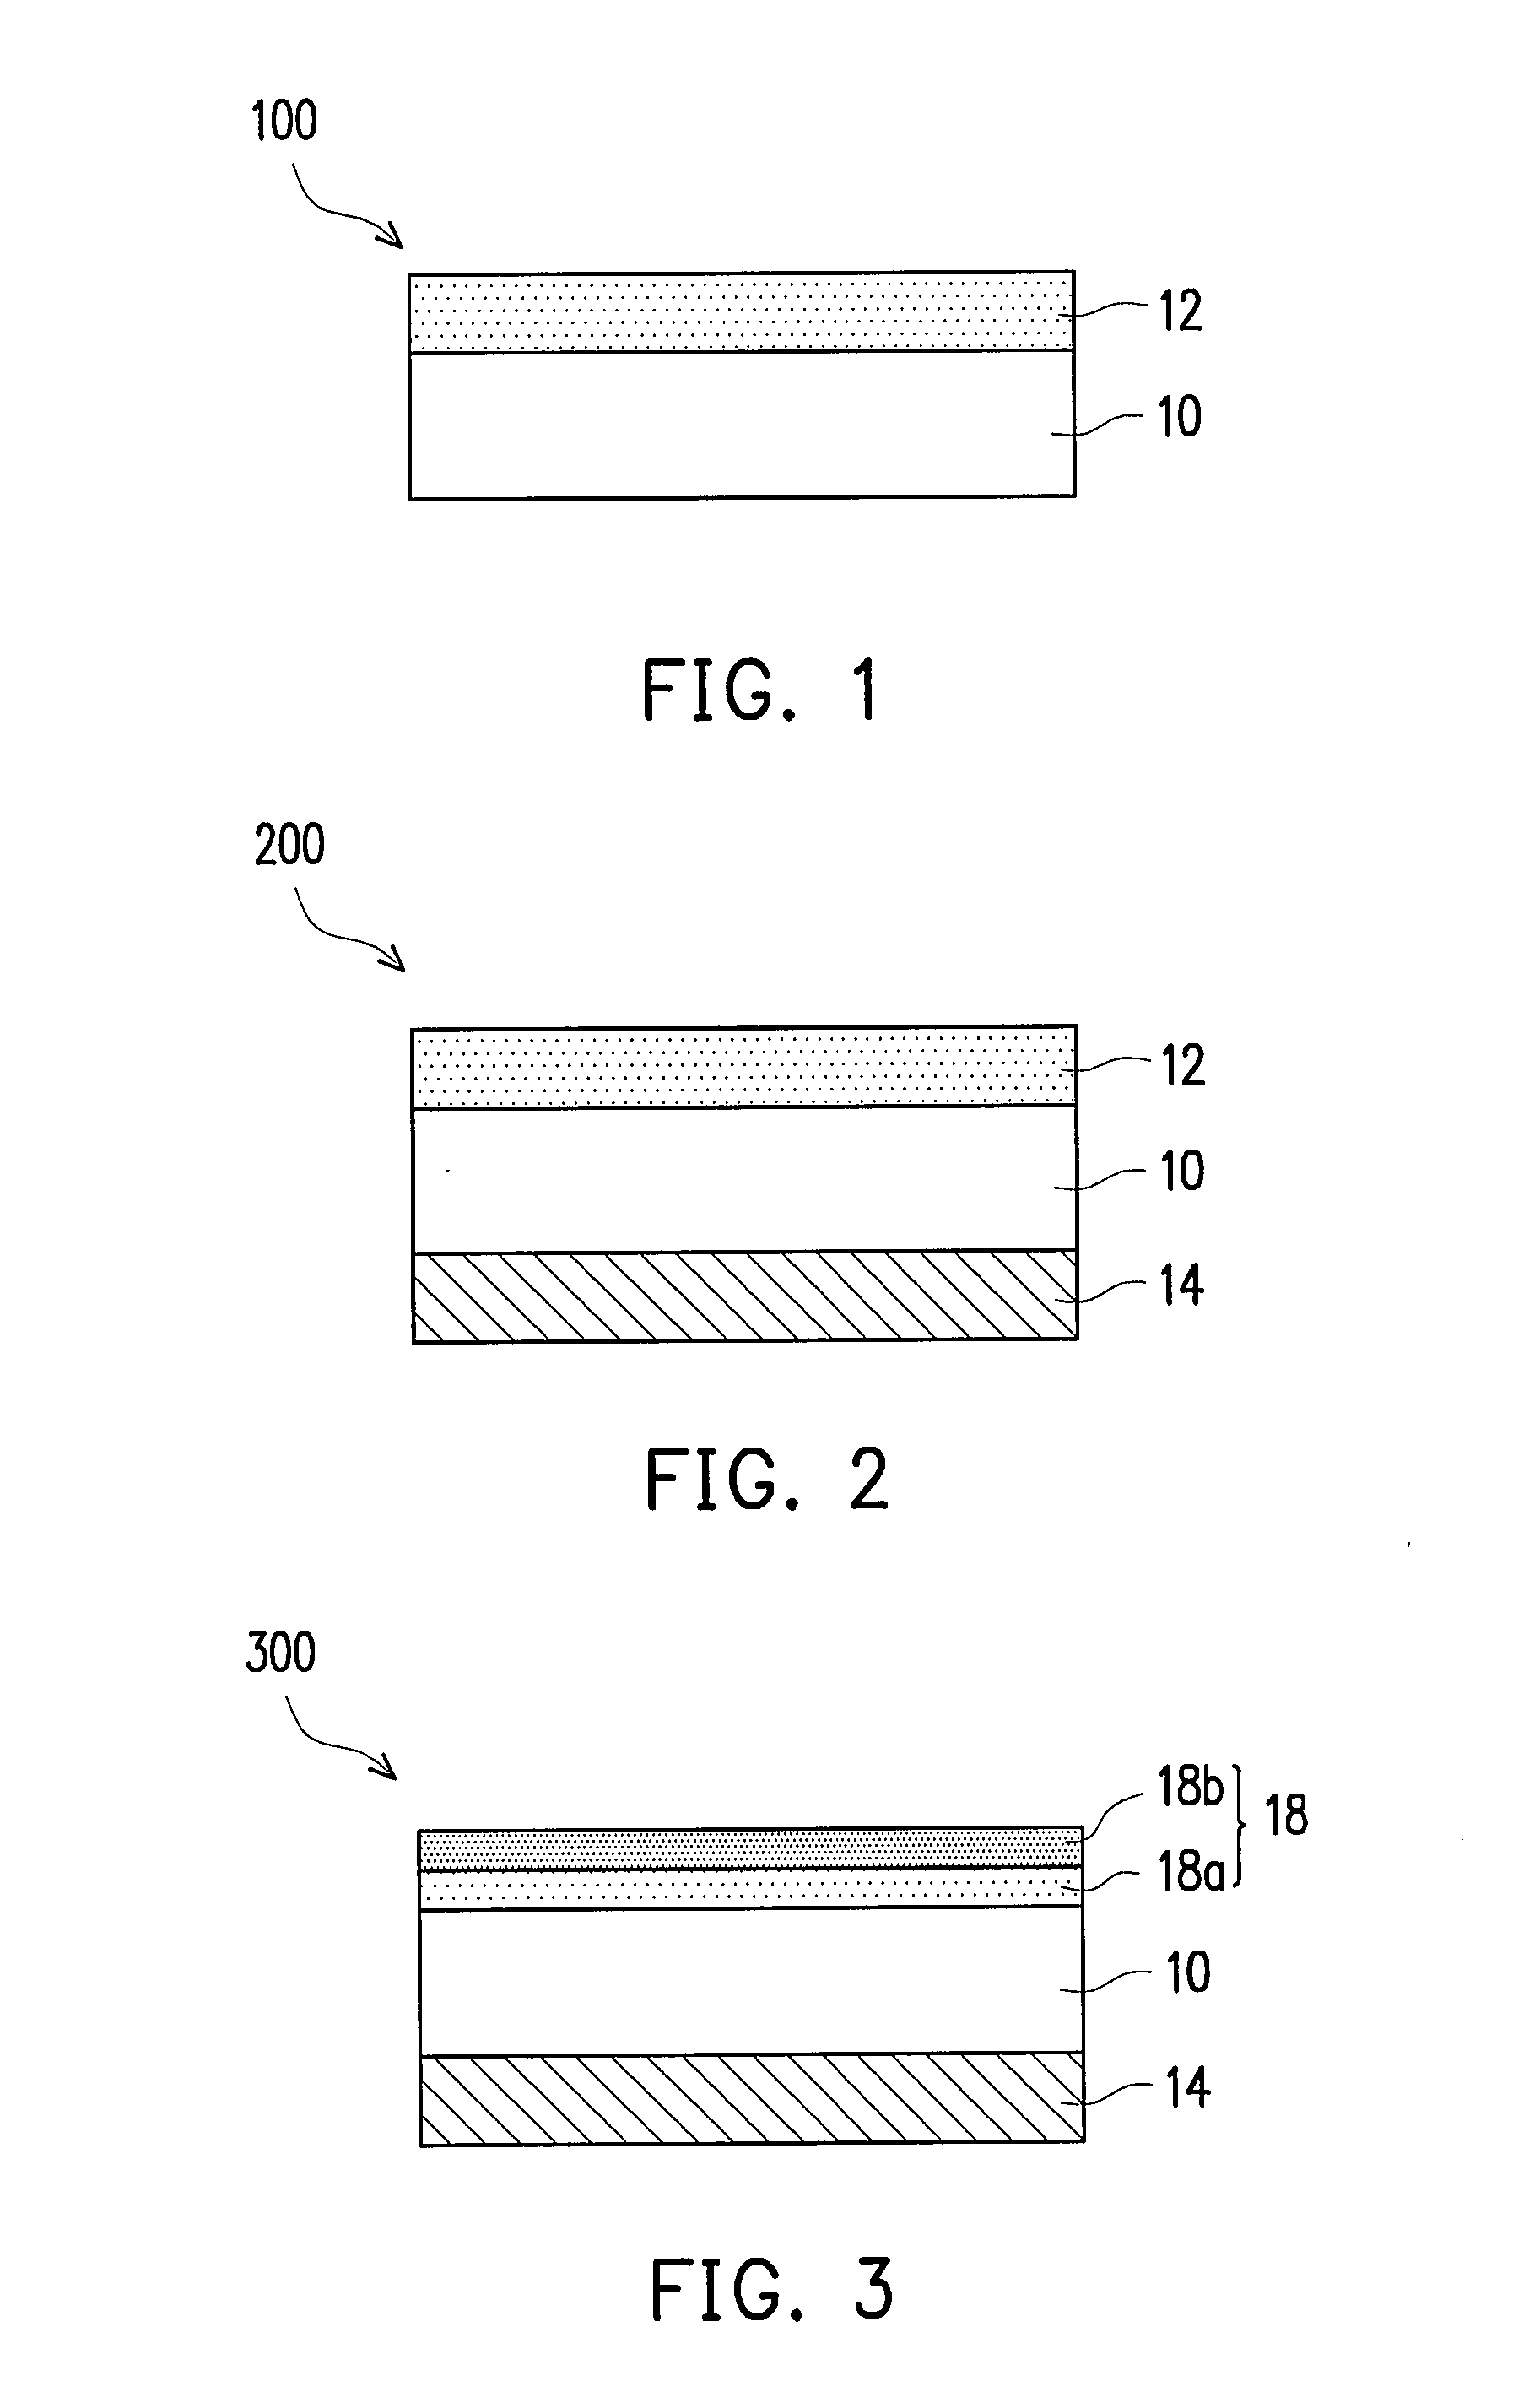 High performance optoelectronic device